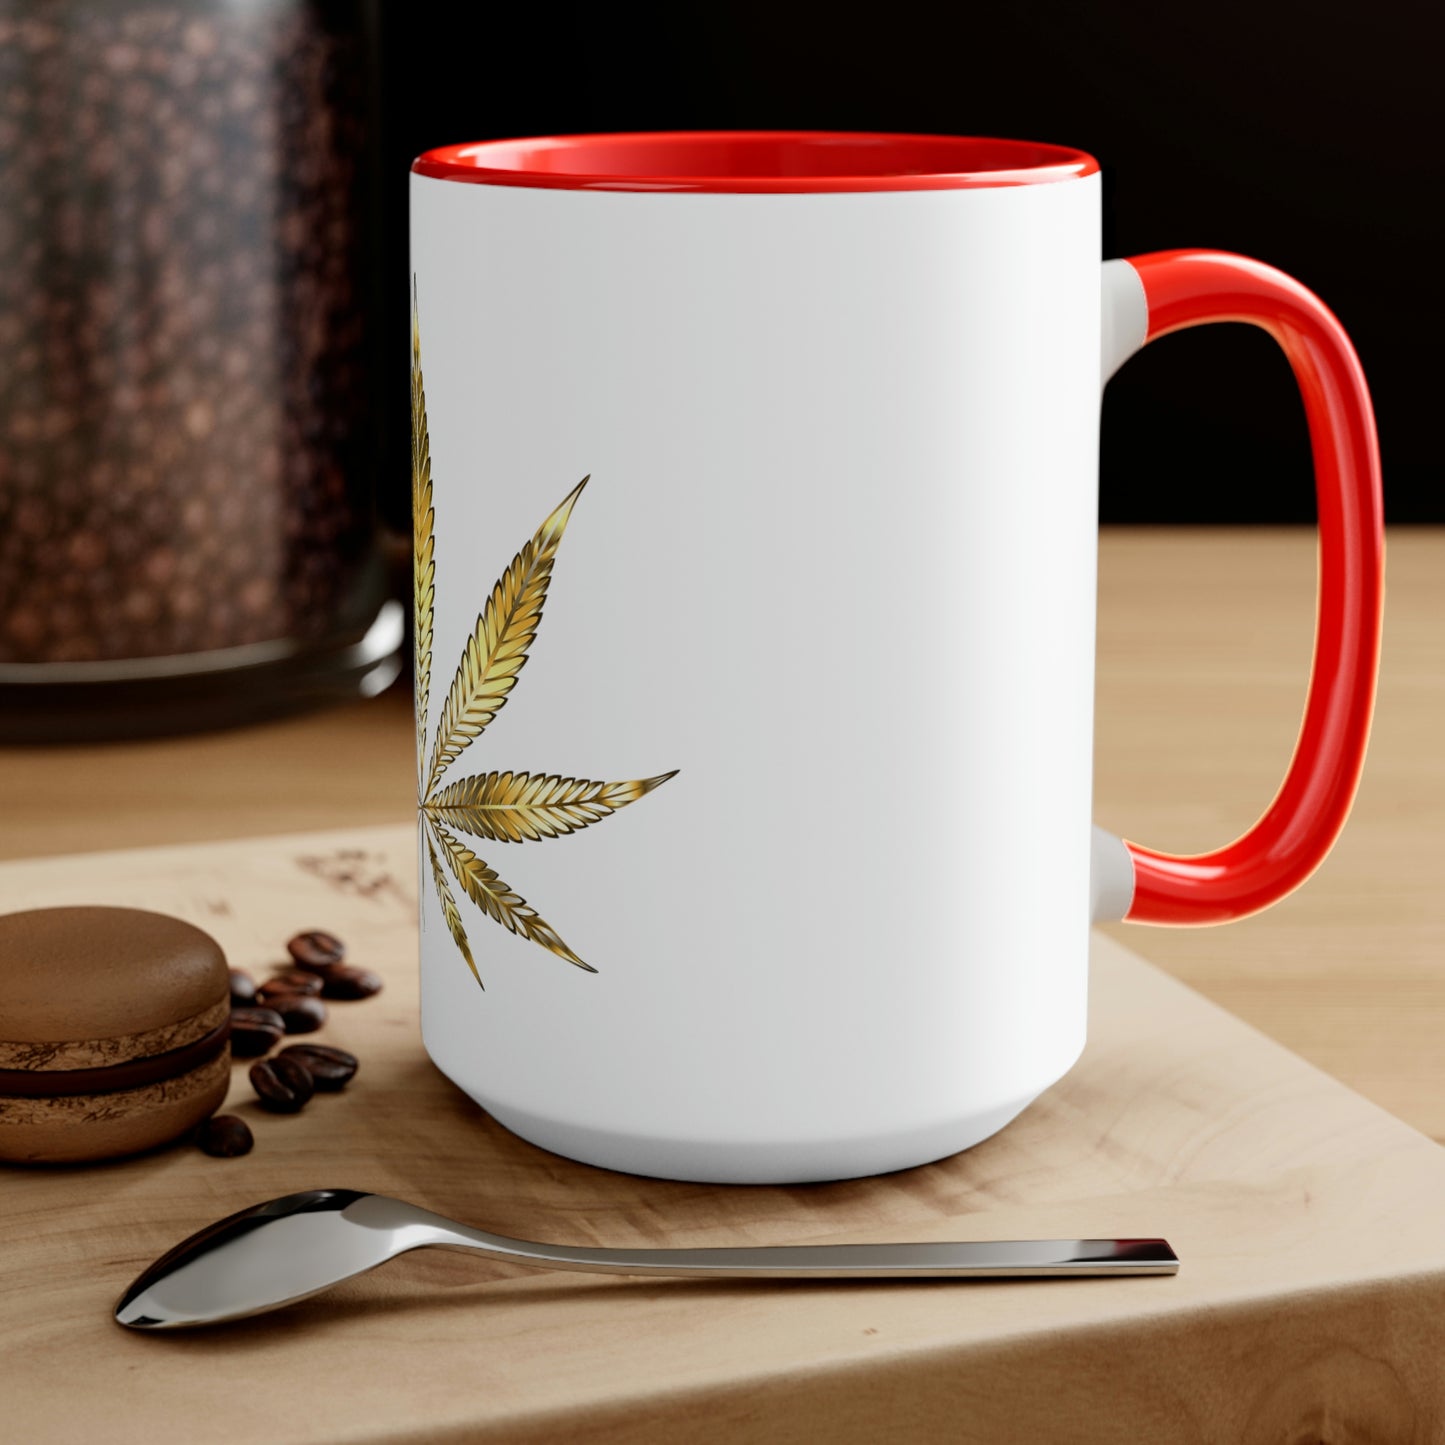 A white cannabis mug with a red interior featuring a bright gold weed leaf on the front center, sitting on a wood base.